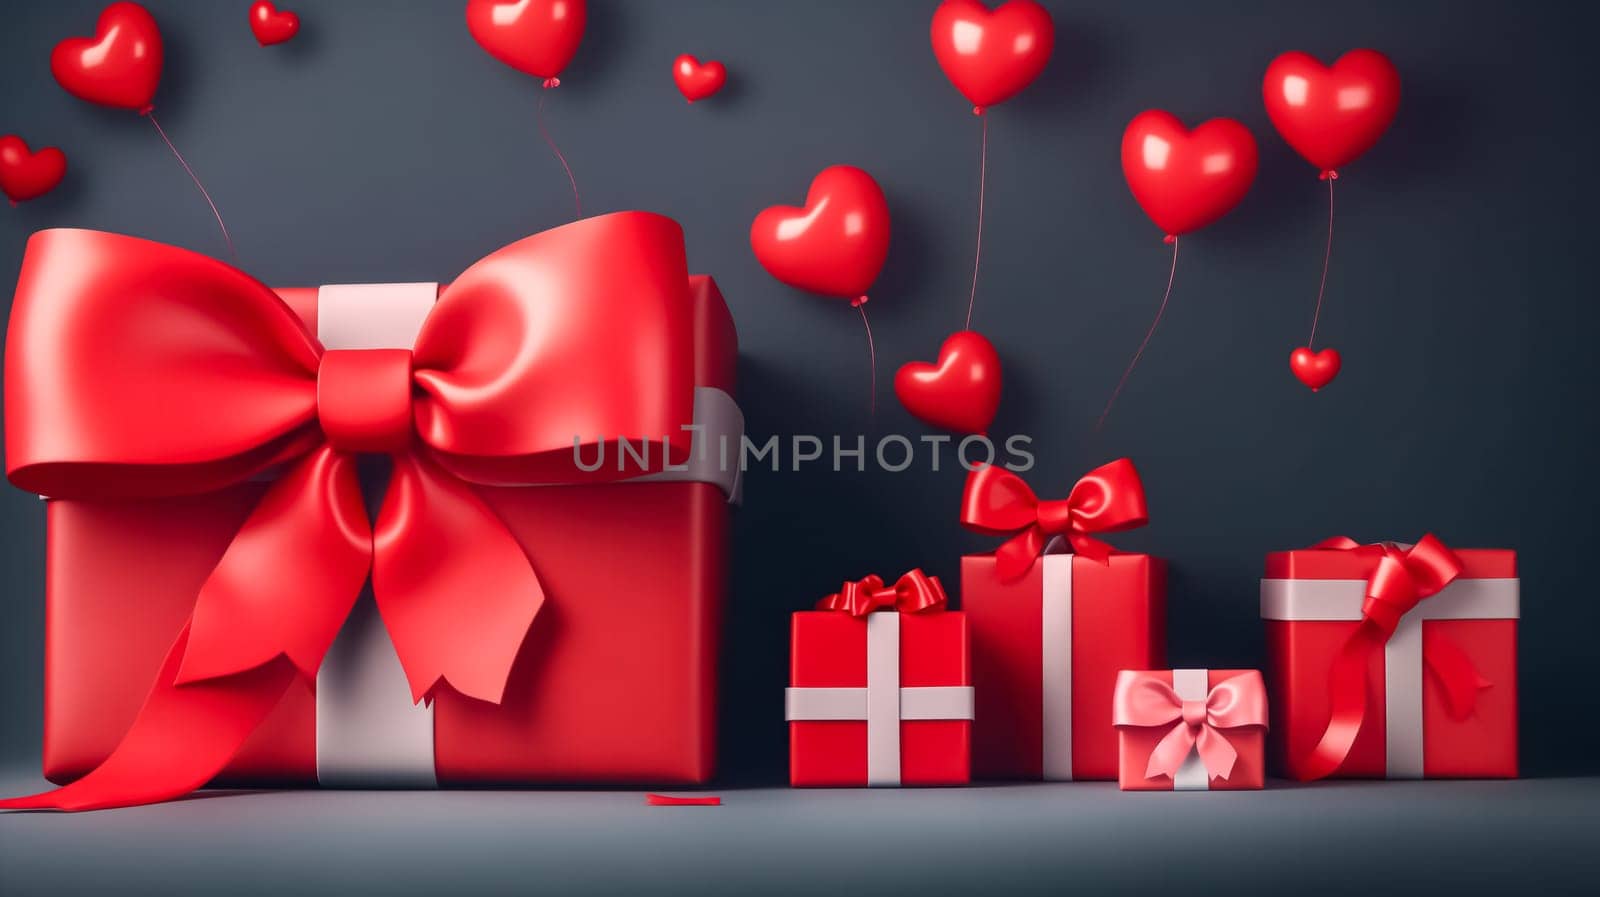 Embrace the Valentines Day spirit with beautifully packaged gift boxes against a background of hearts. Ample space for text to convey your heartfelt message.